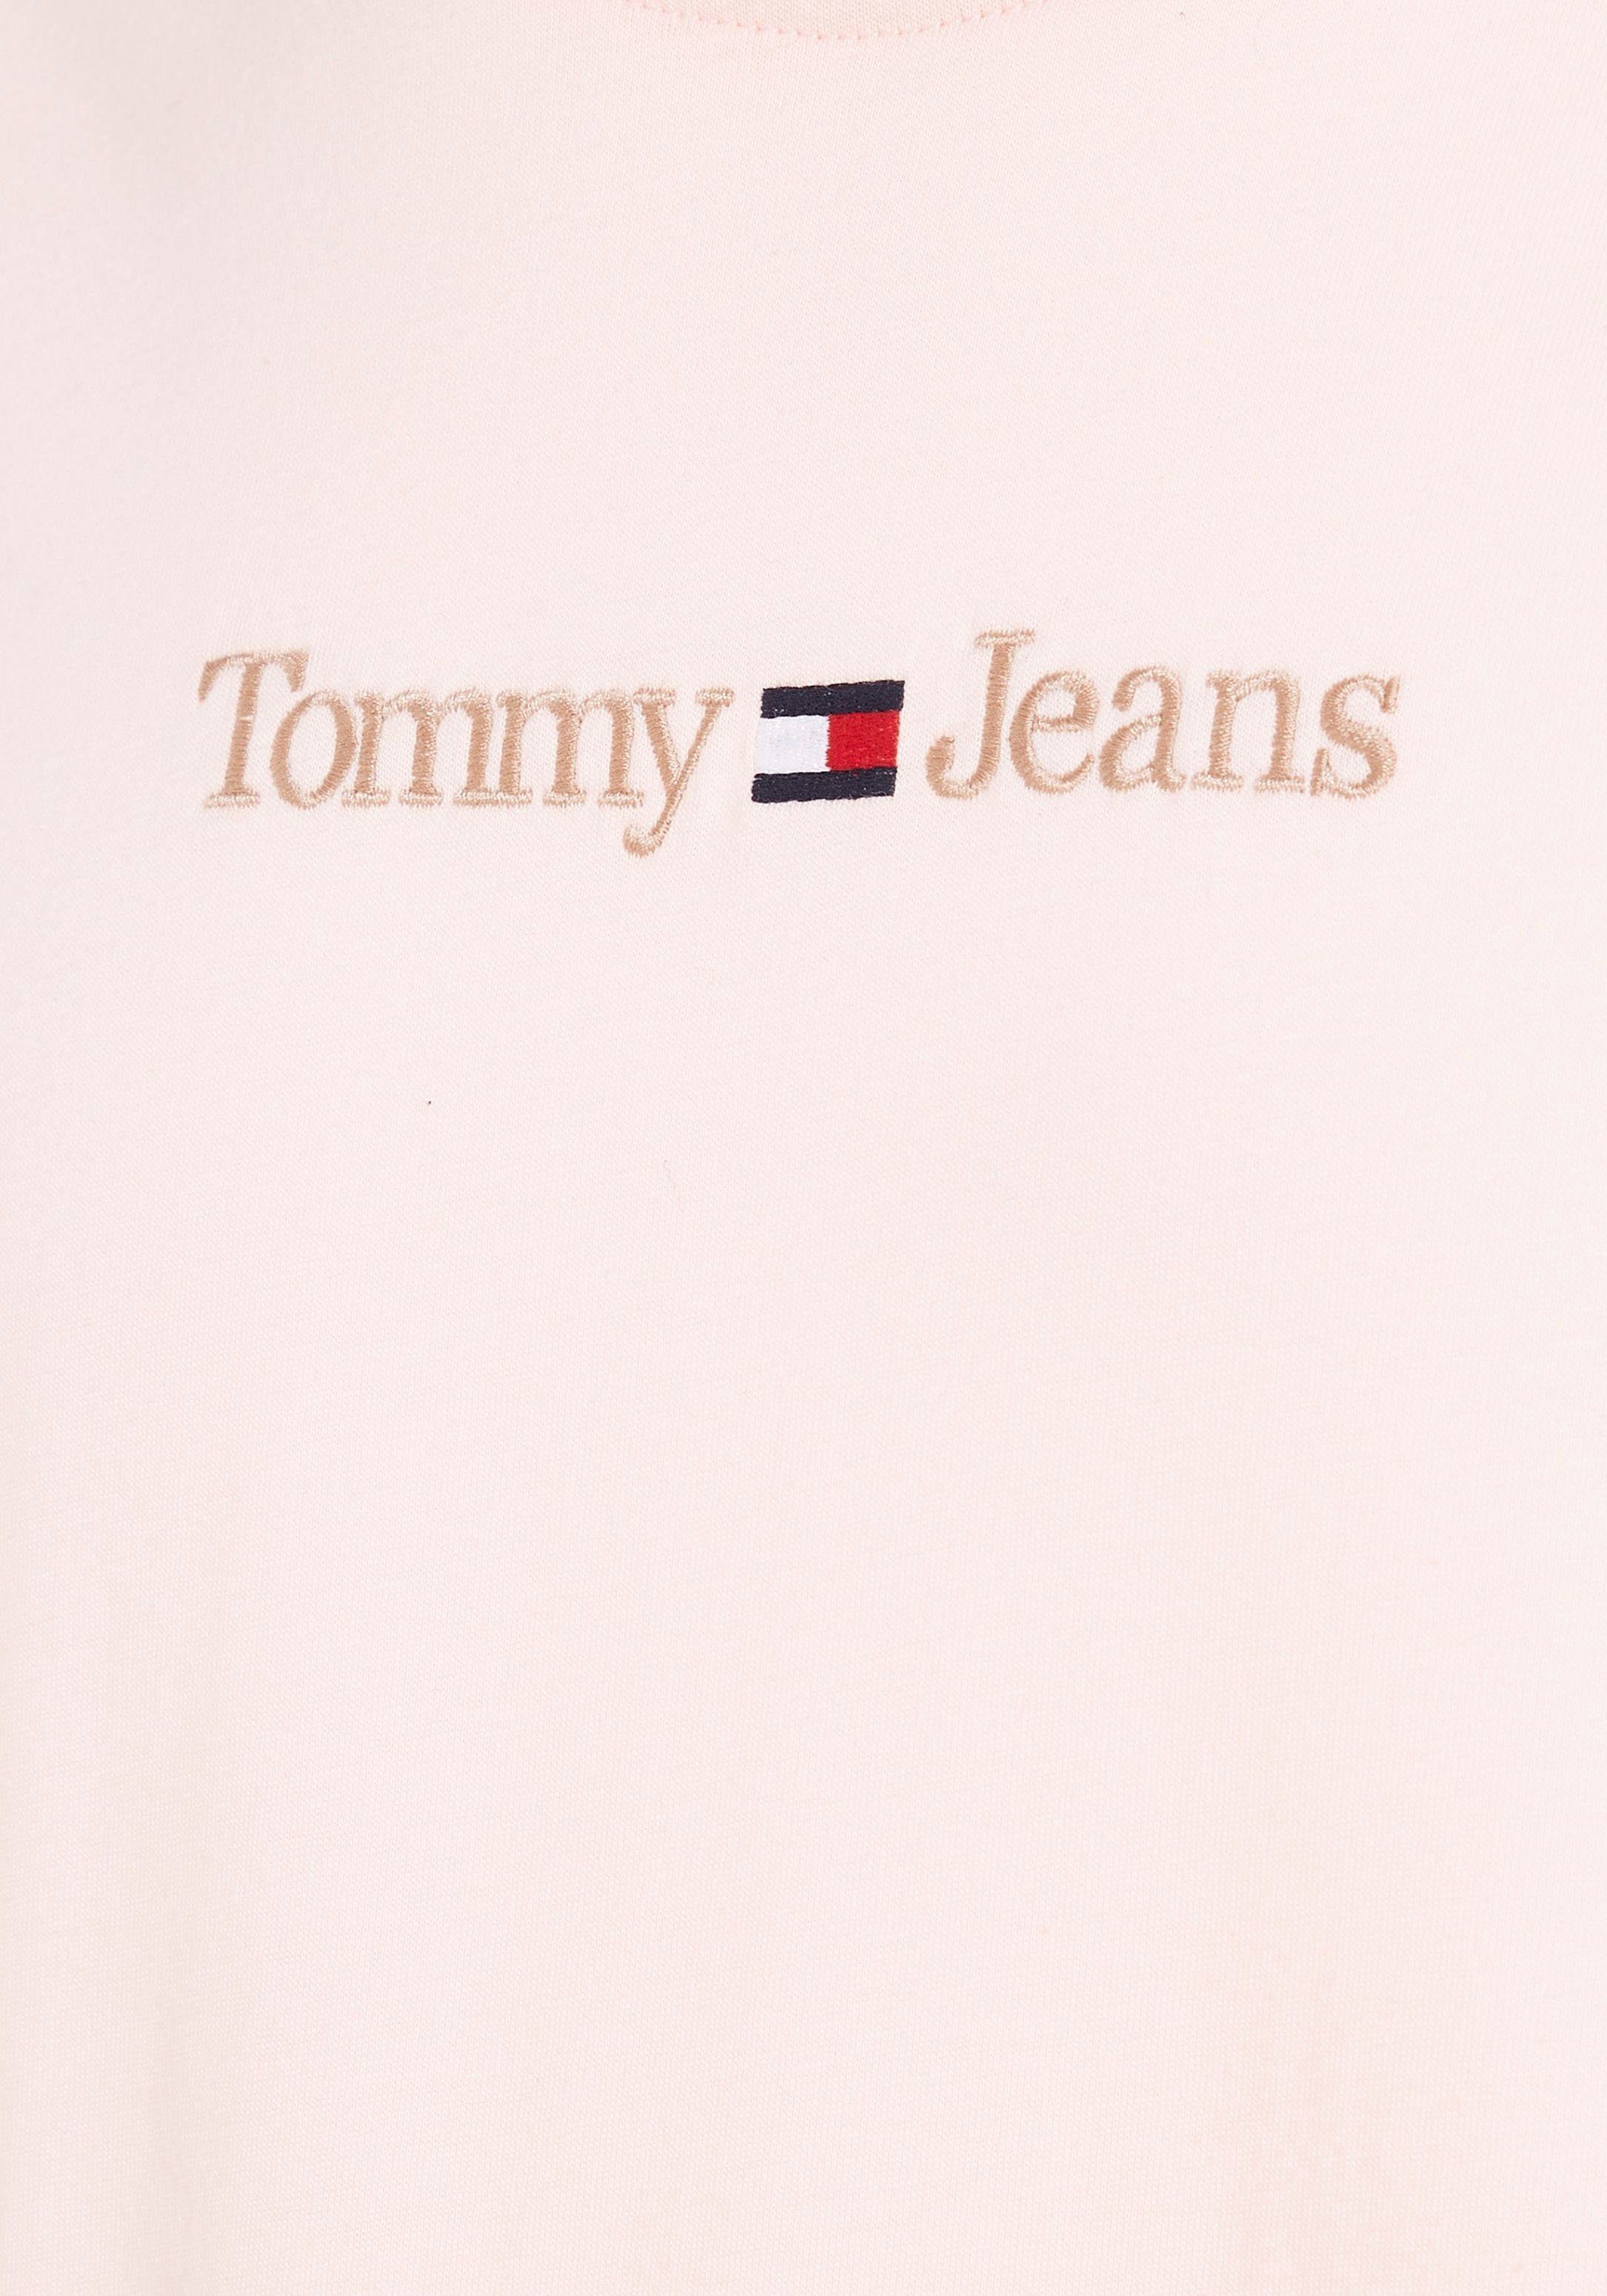 CLSC Faint TJM TEE TEXT SMALL Pink Tommy Jeans T-Shirt